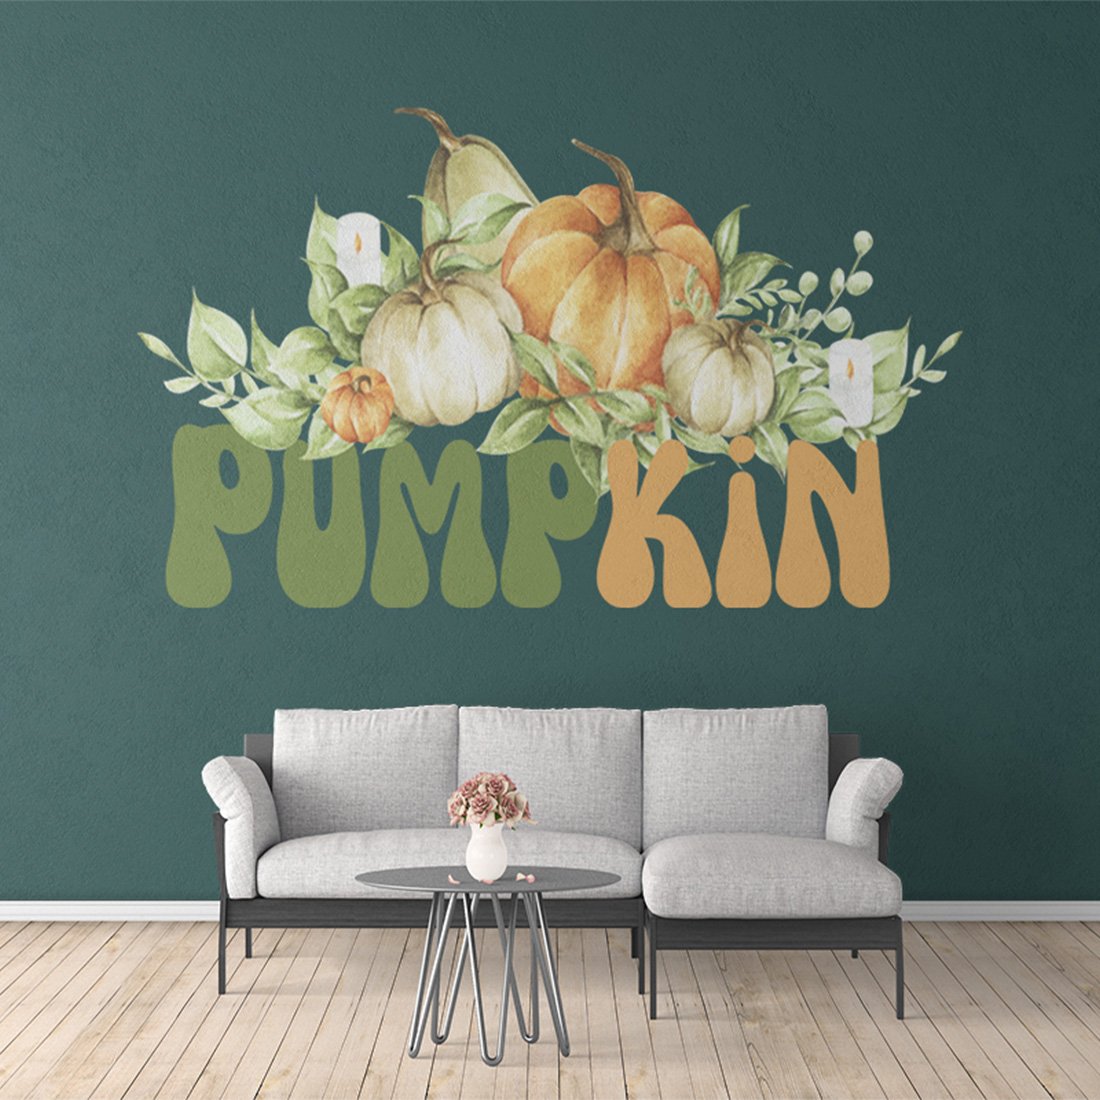 Exquisite picture of a pumpkin on the wall